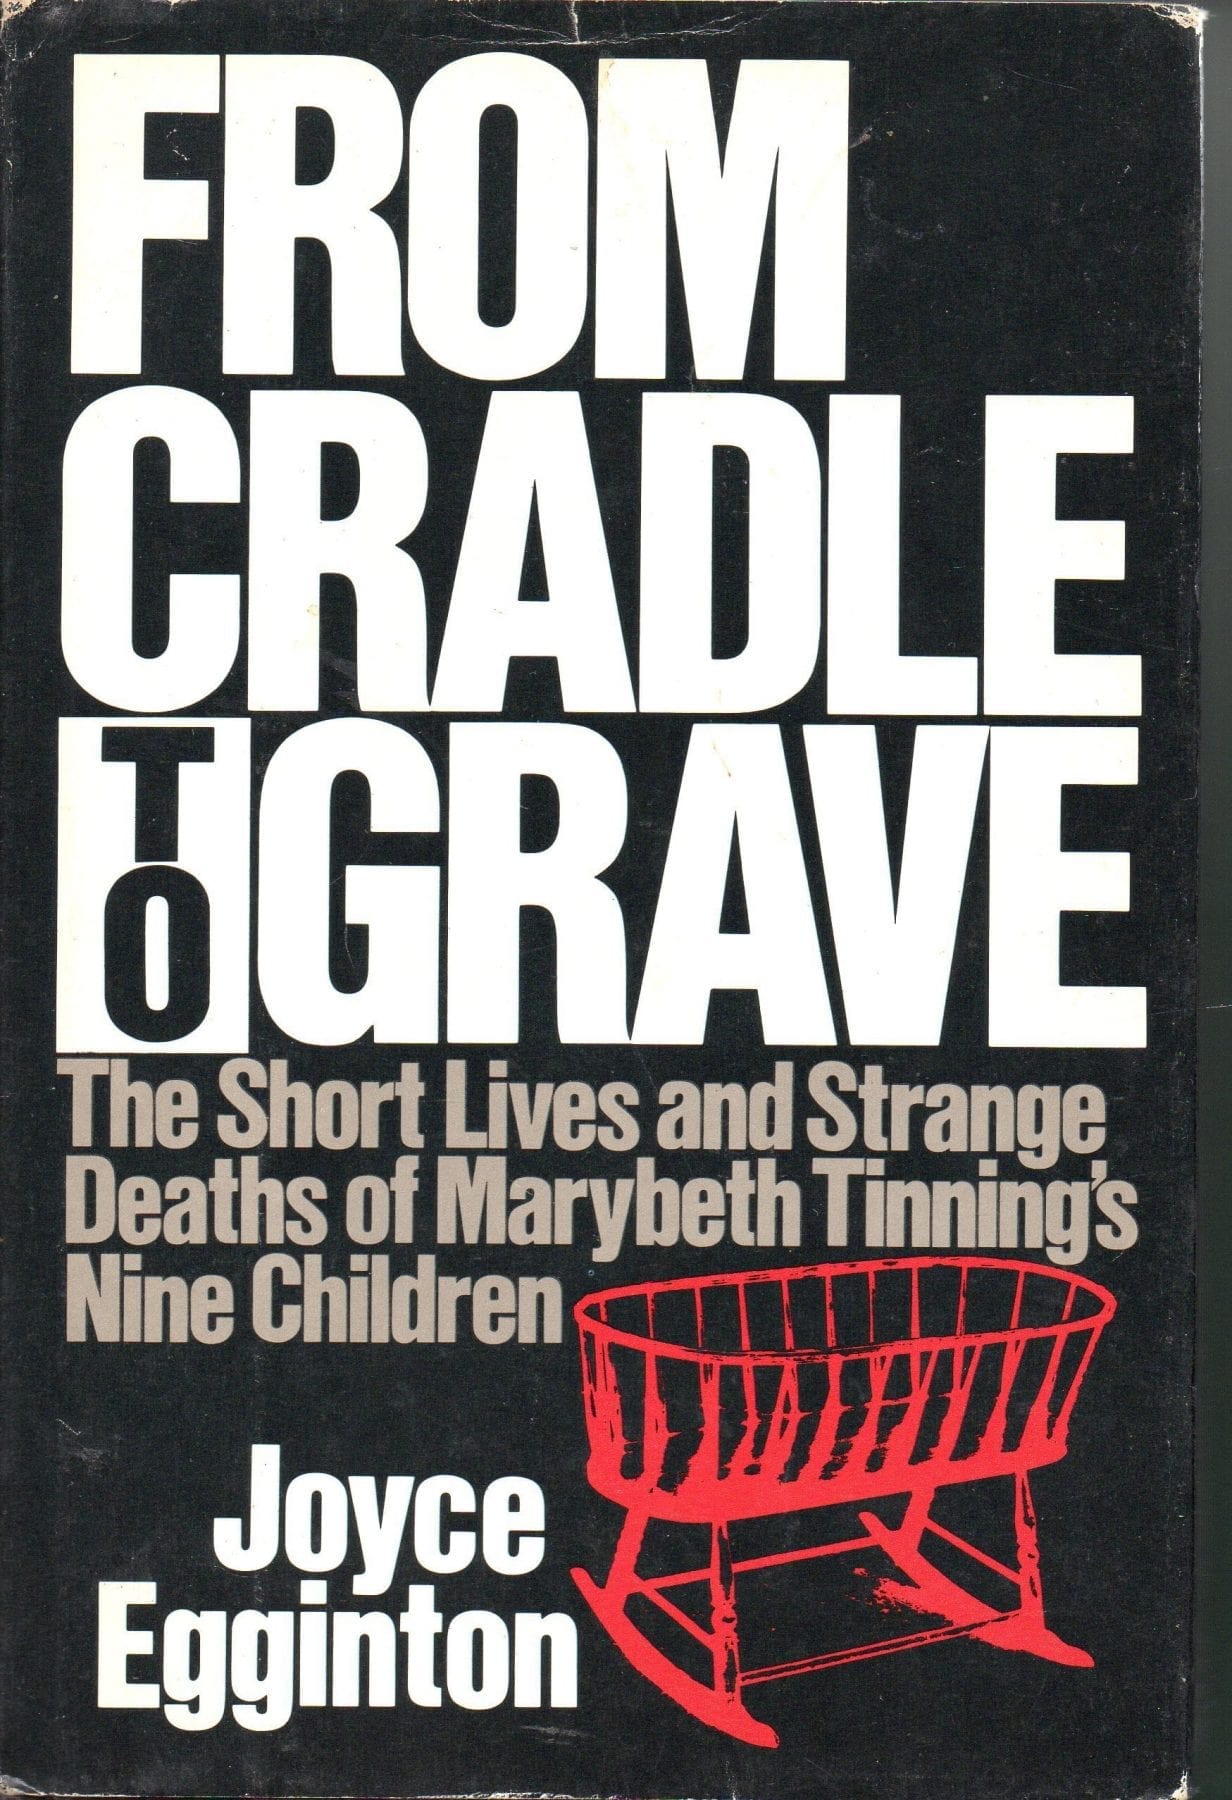 From Cradle to Grave- The Short Lives and Strange Deaths of Maybeth Tinning’s Nine Children by Joyce Egginton